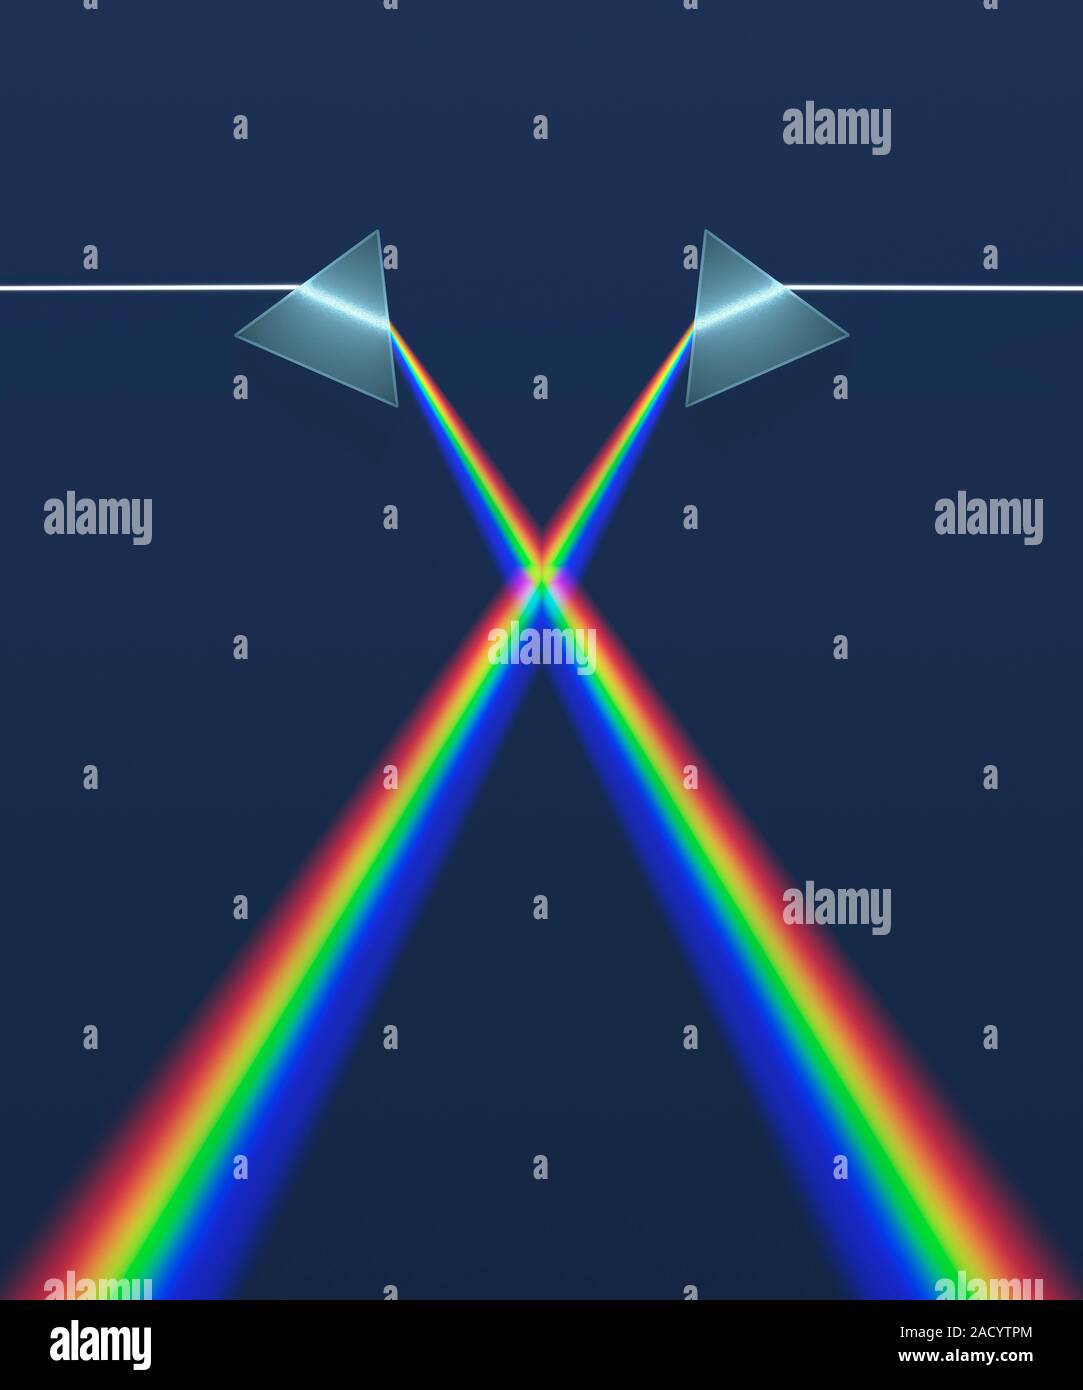 Prisms demonstrating refraction of white light into the visible ...